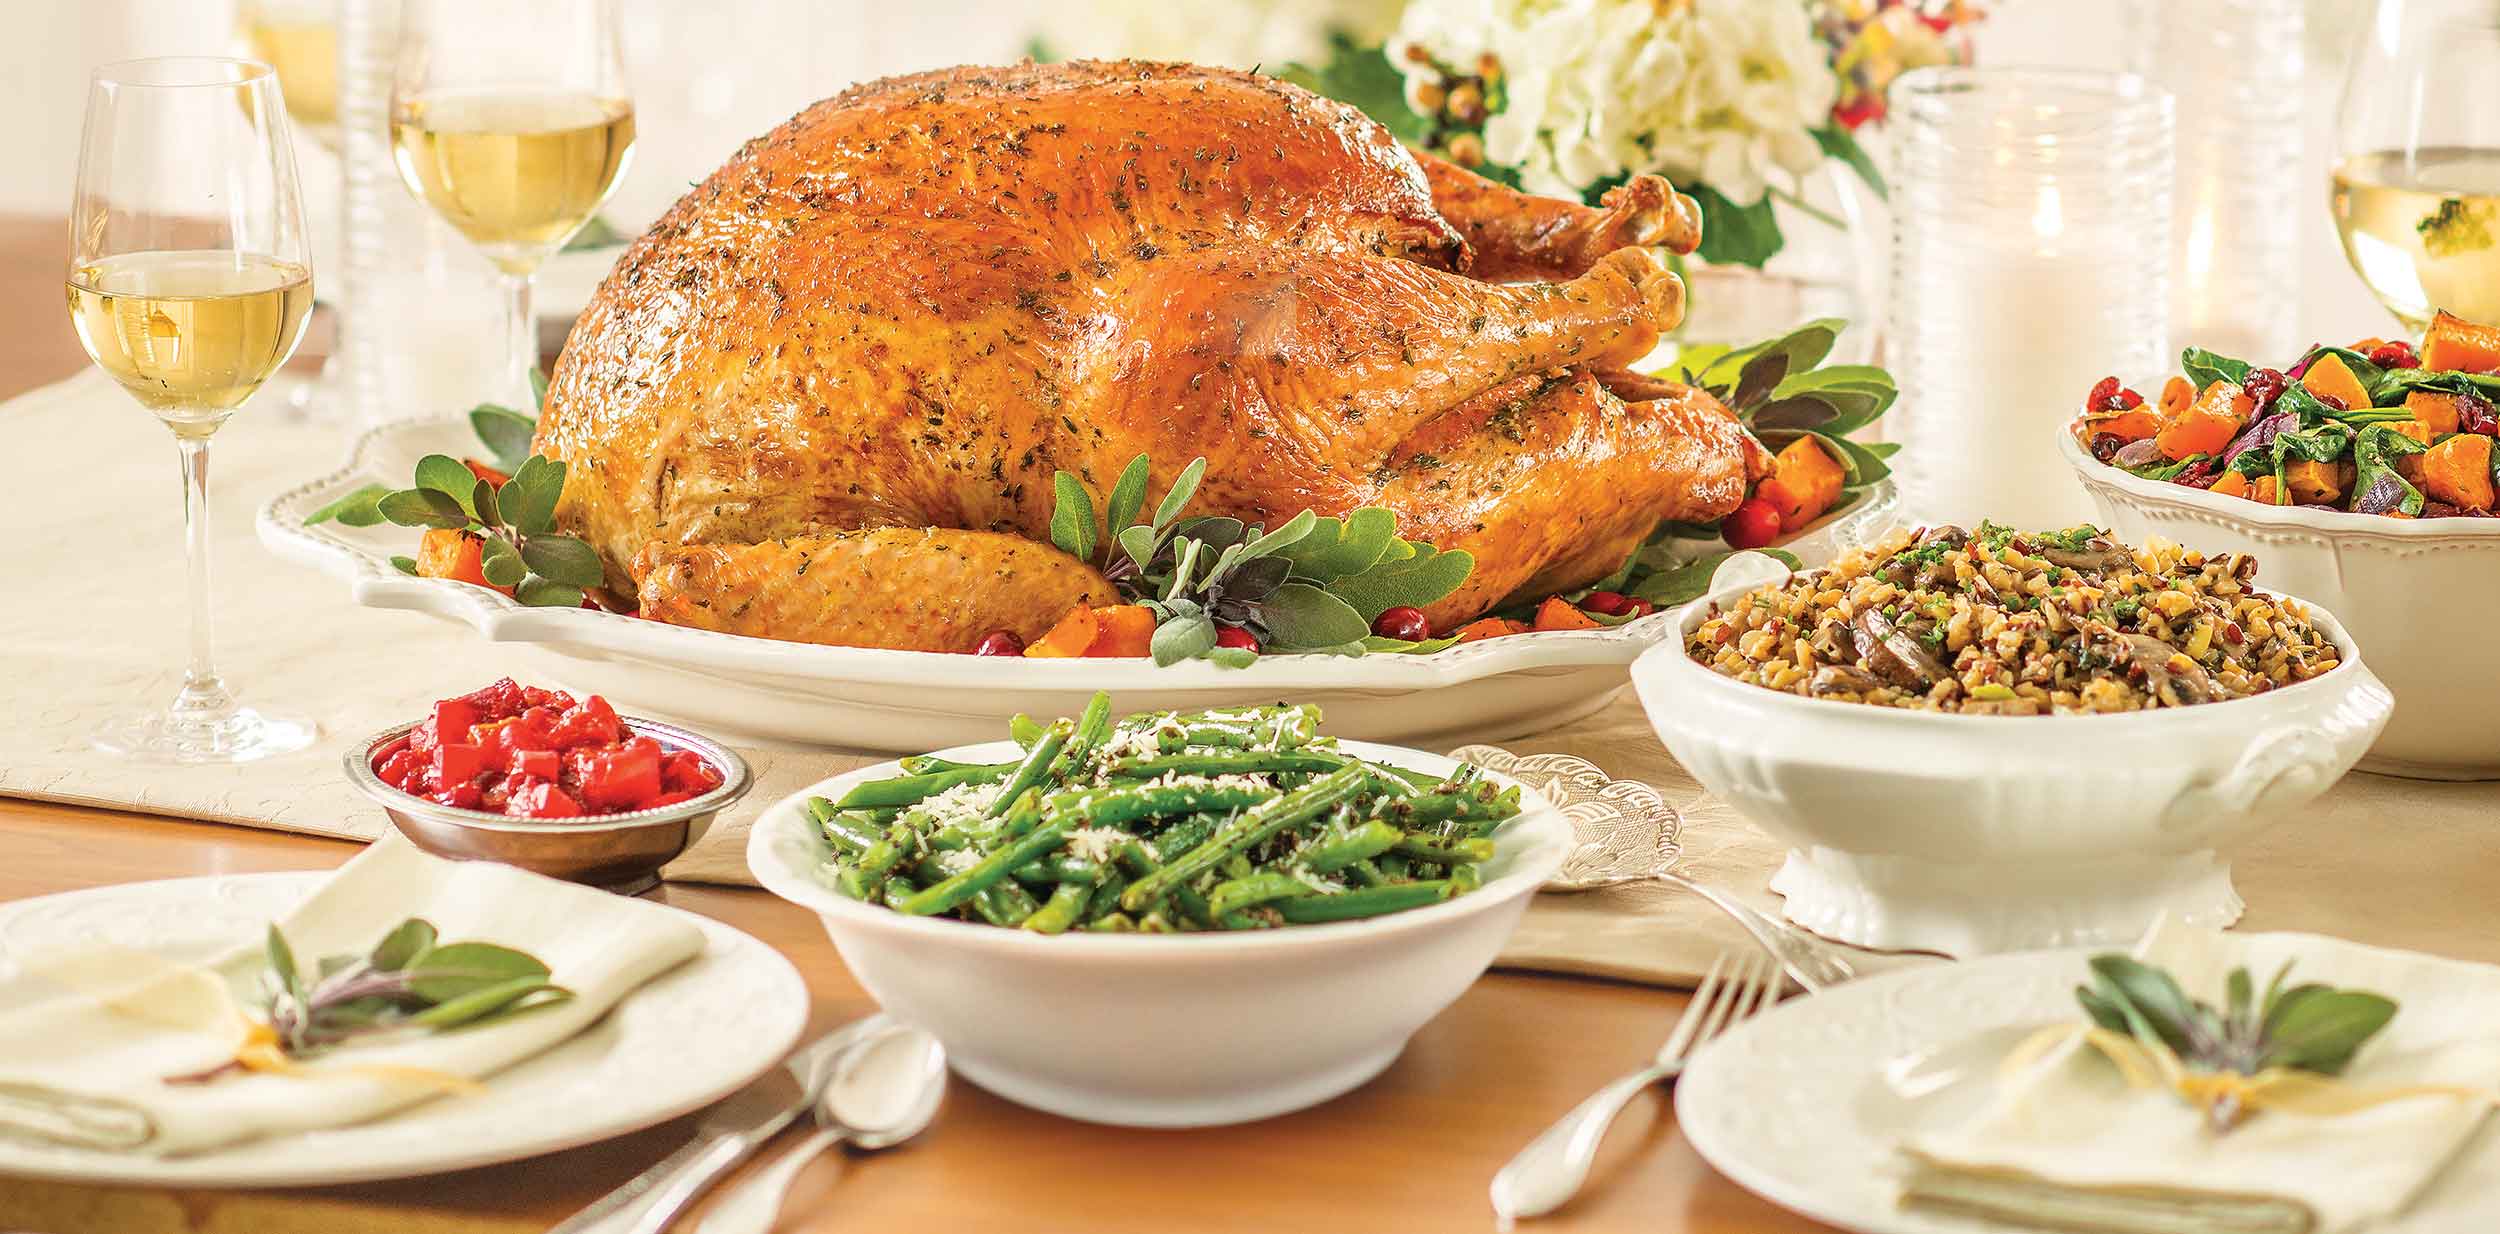 Wegmans Christmas Dinner Delivery Catering orders are now available